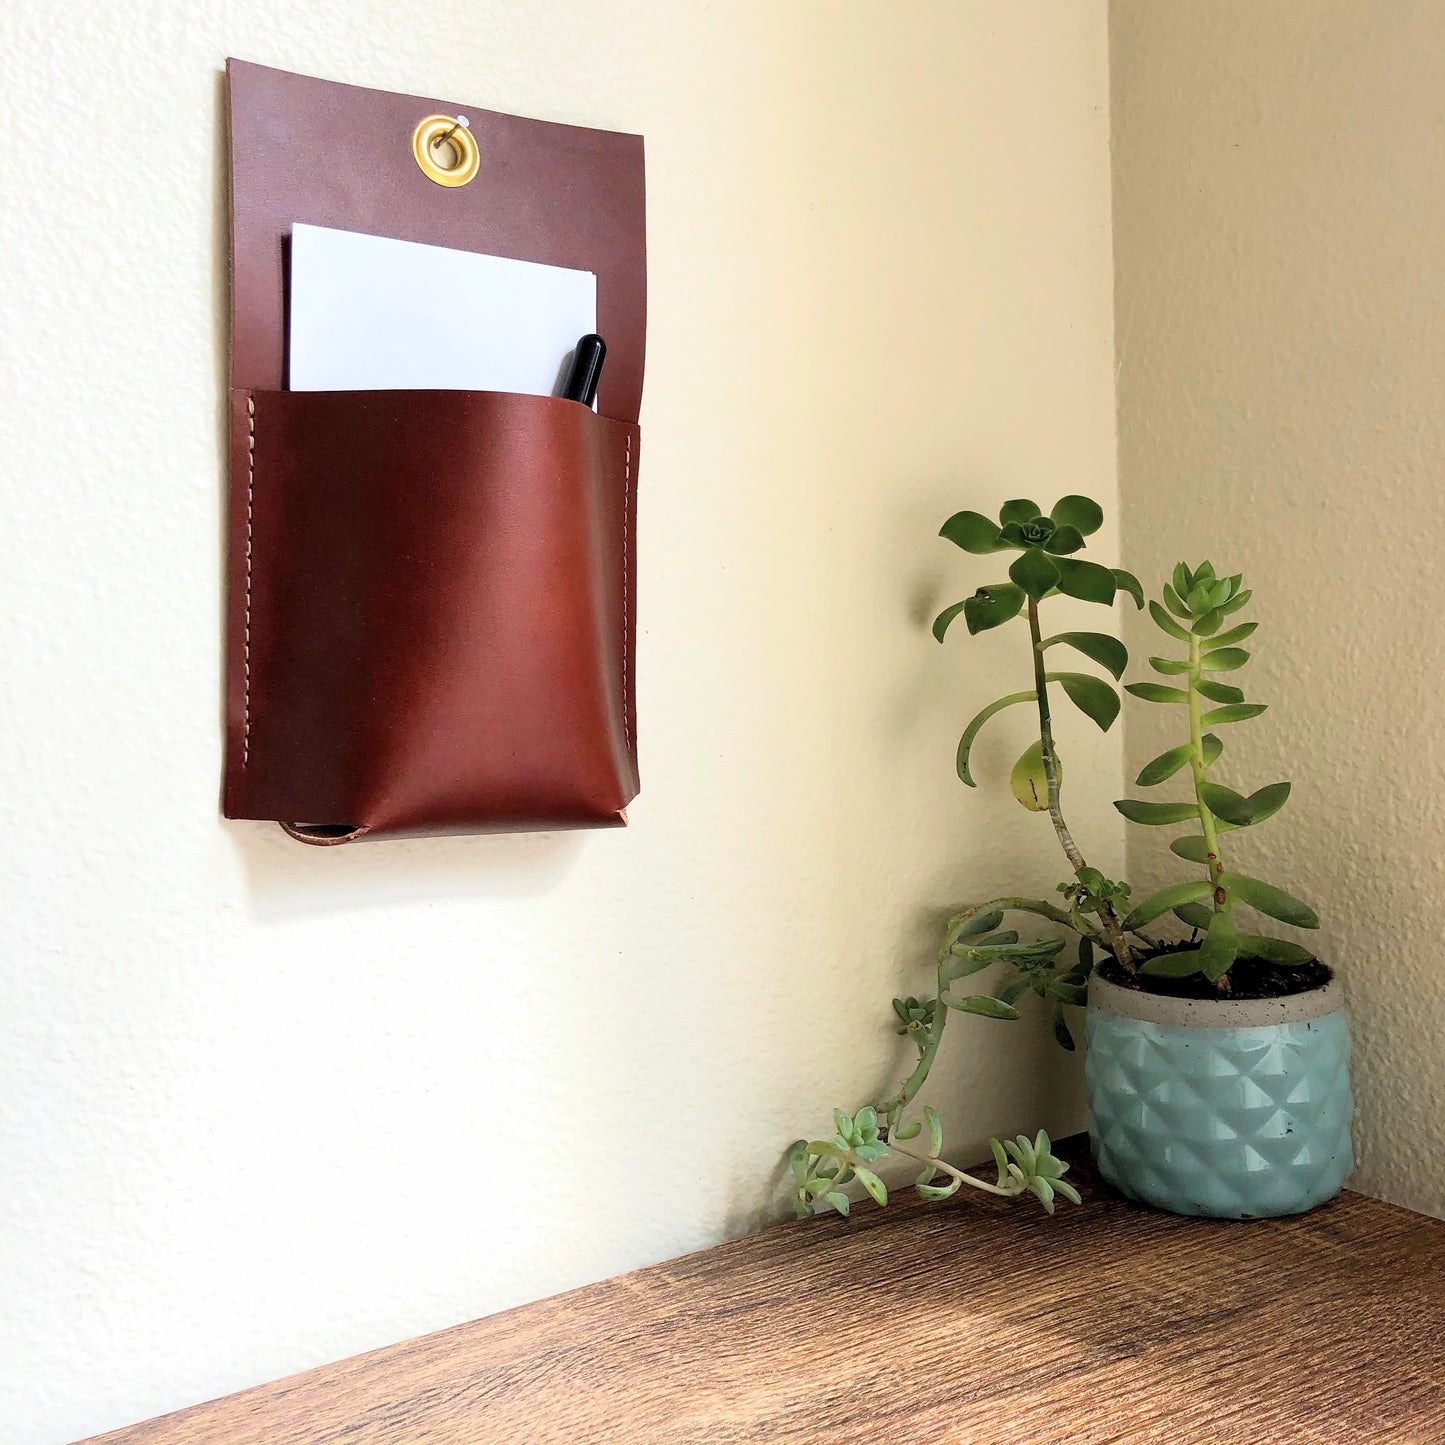 Brown wall caddy holds a pen and paper near a cute potted plant on a table.